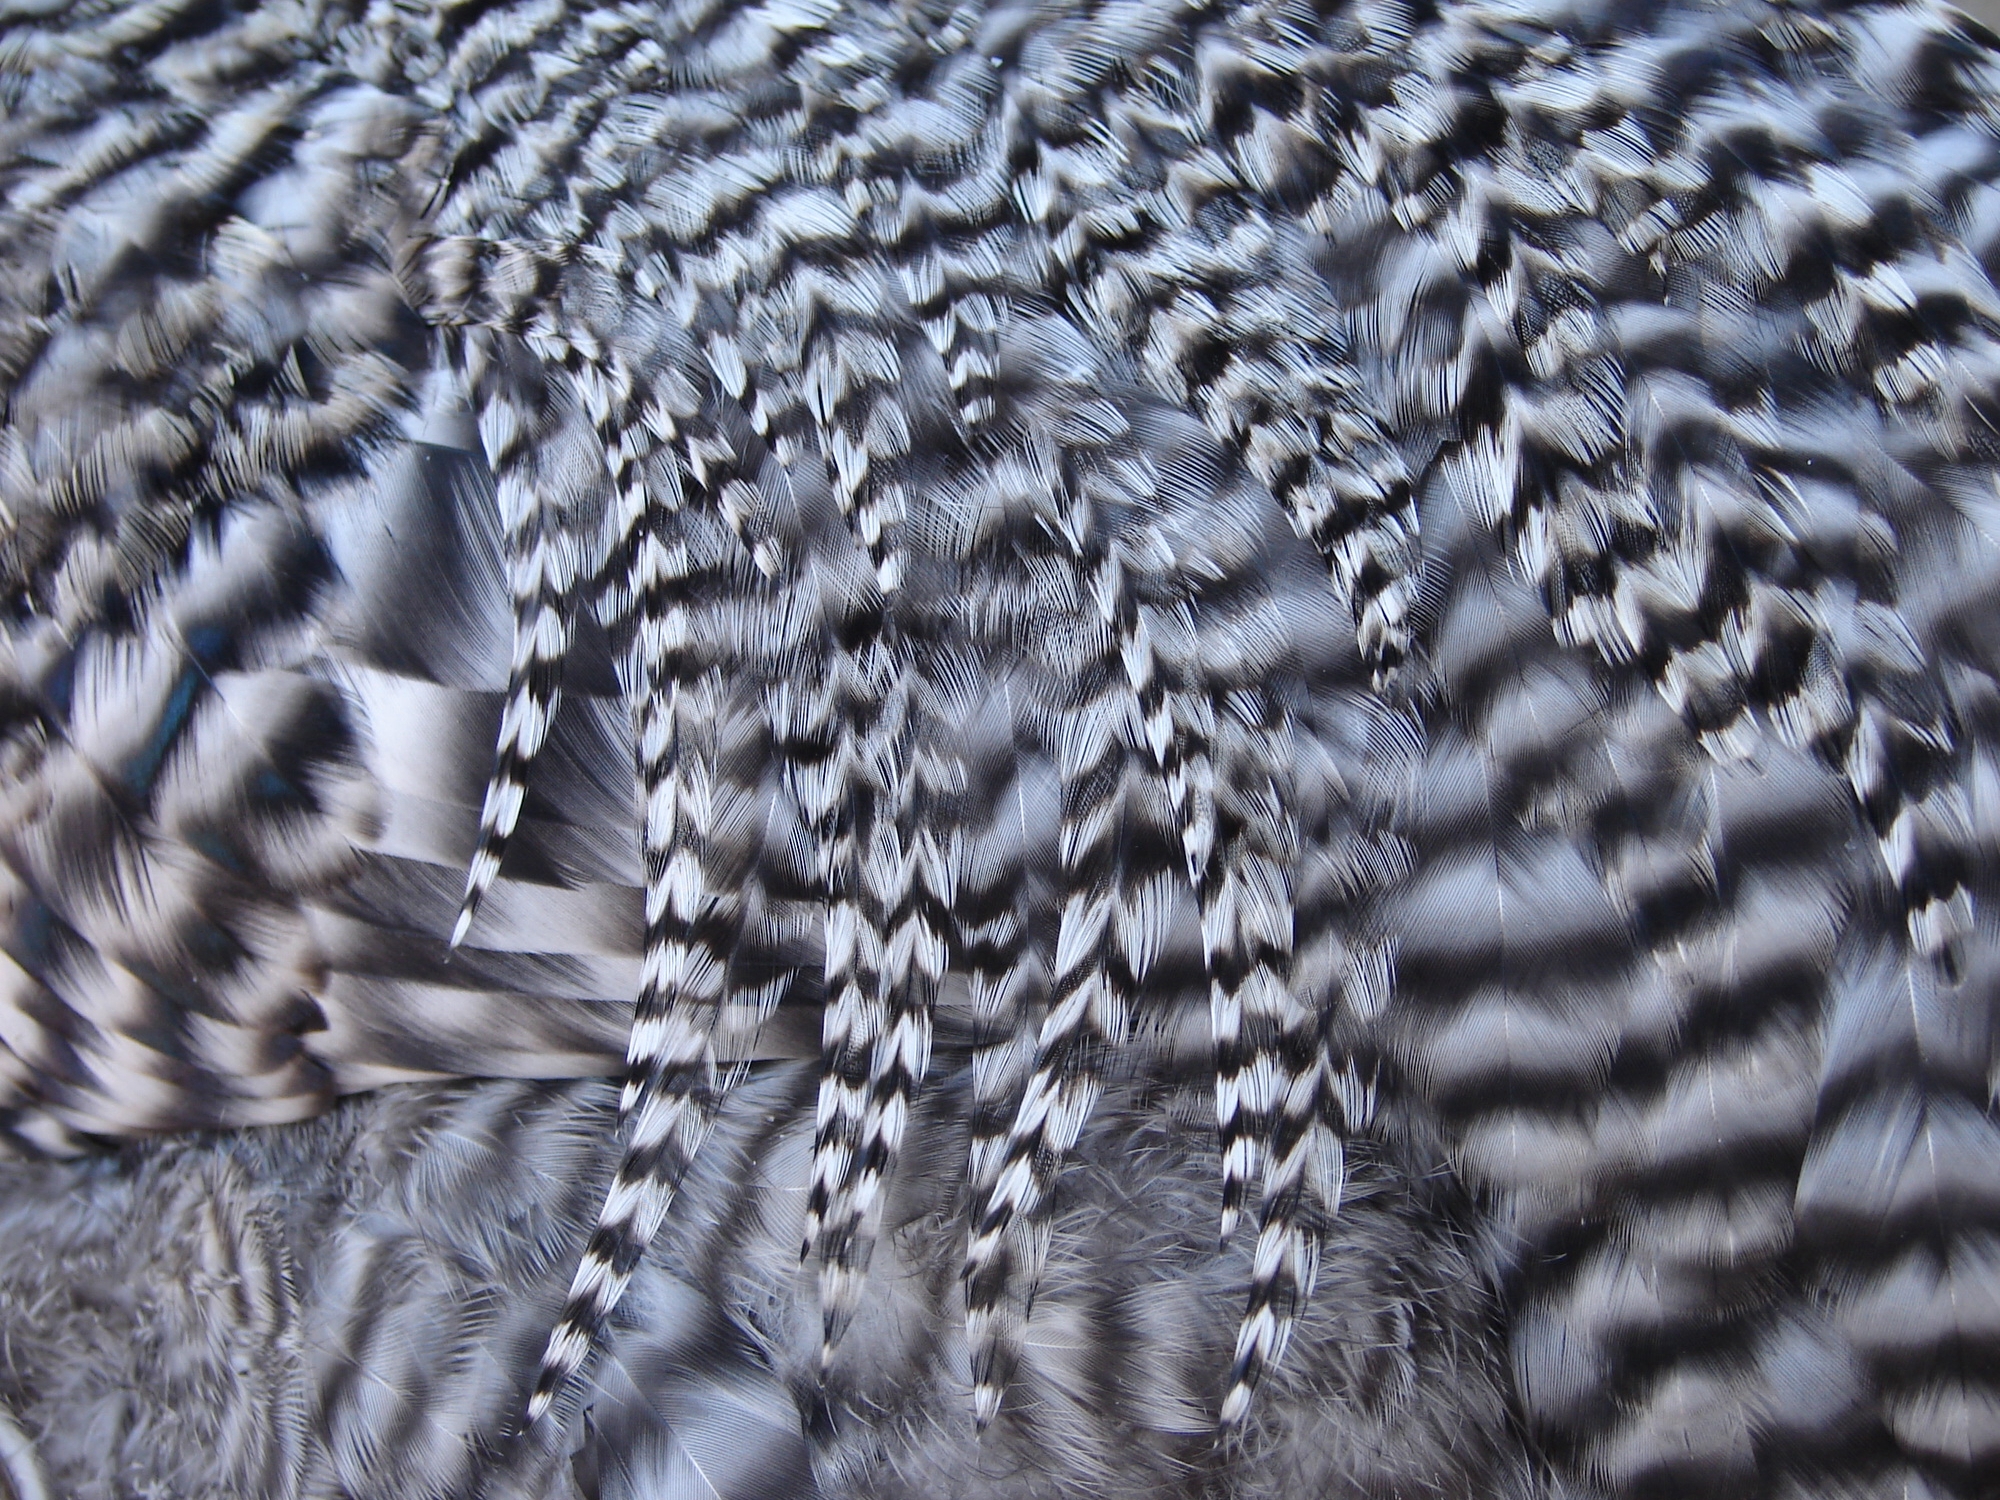 Striped Chicken Feathers